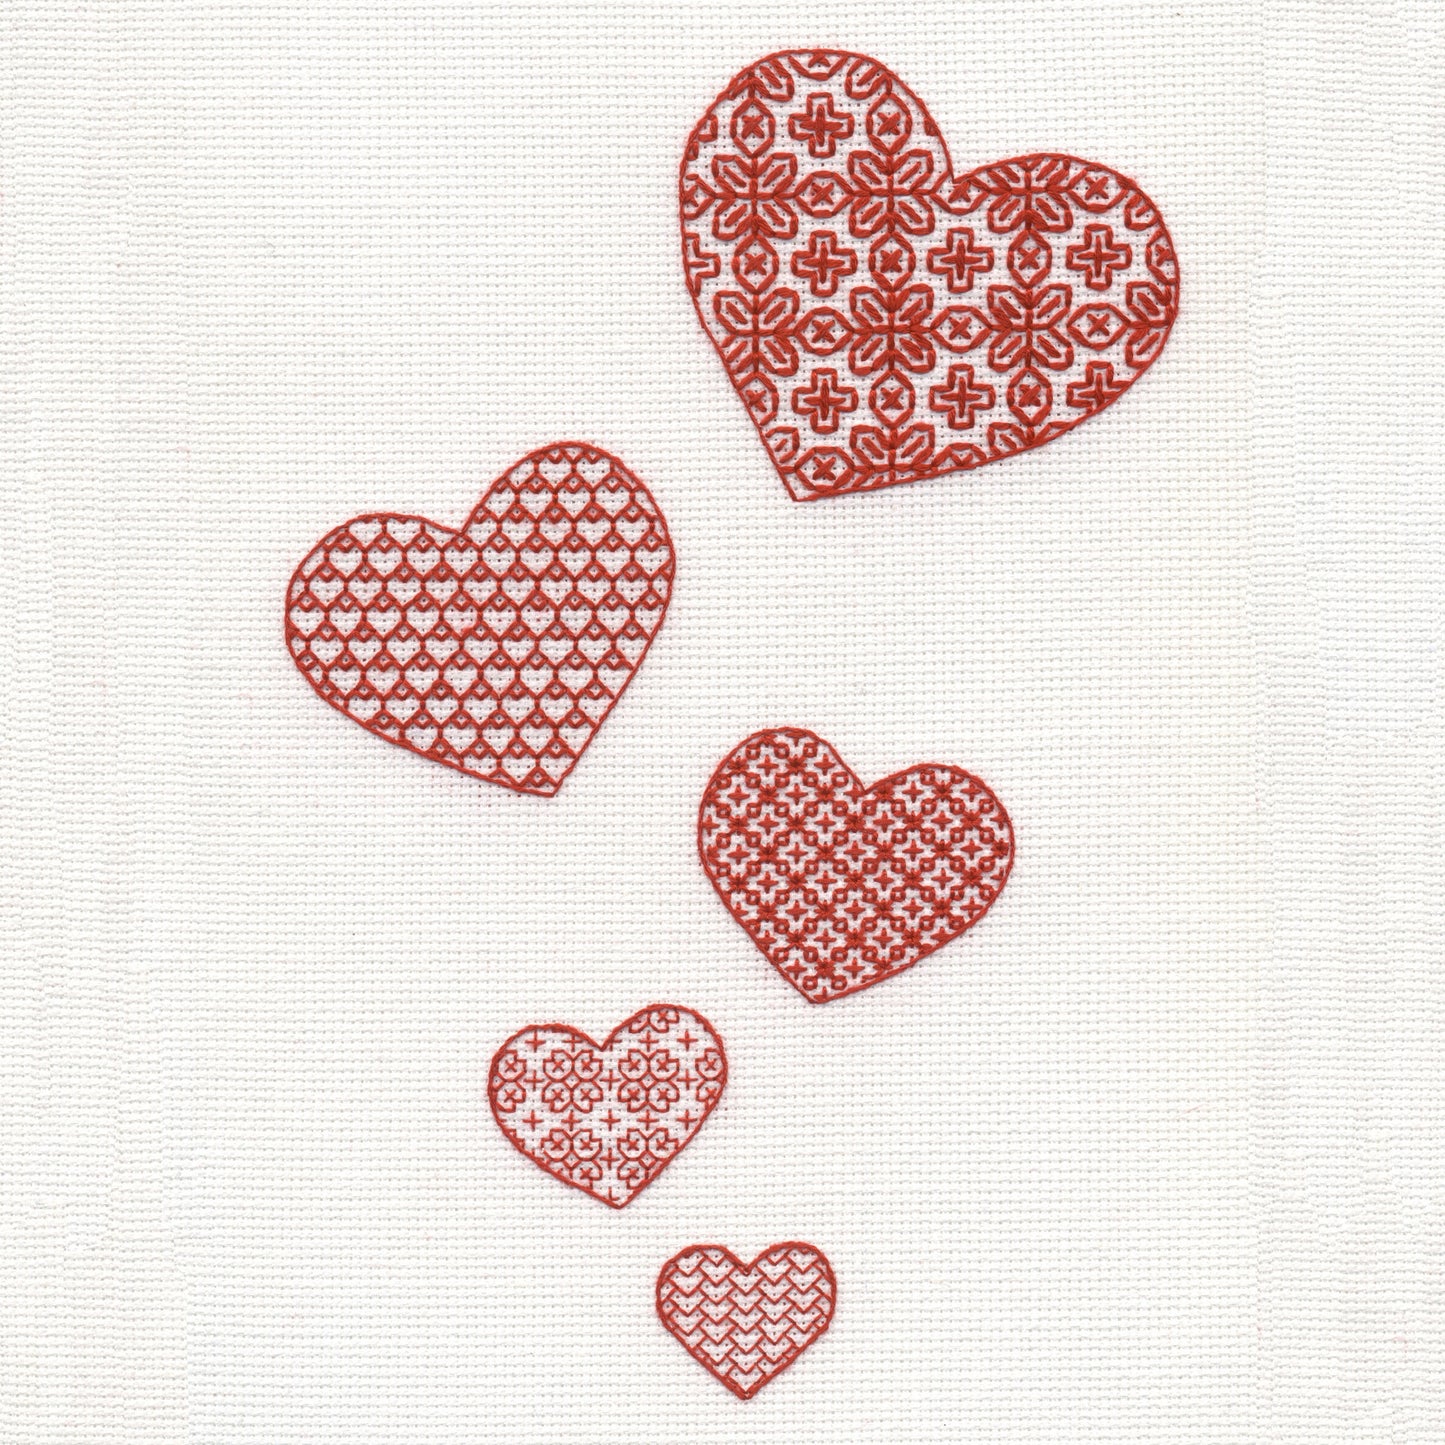 'Lovehearts' Scarletwork Embroidery Pattern